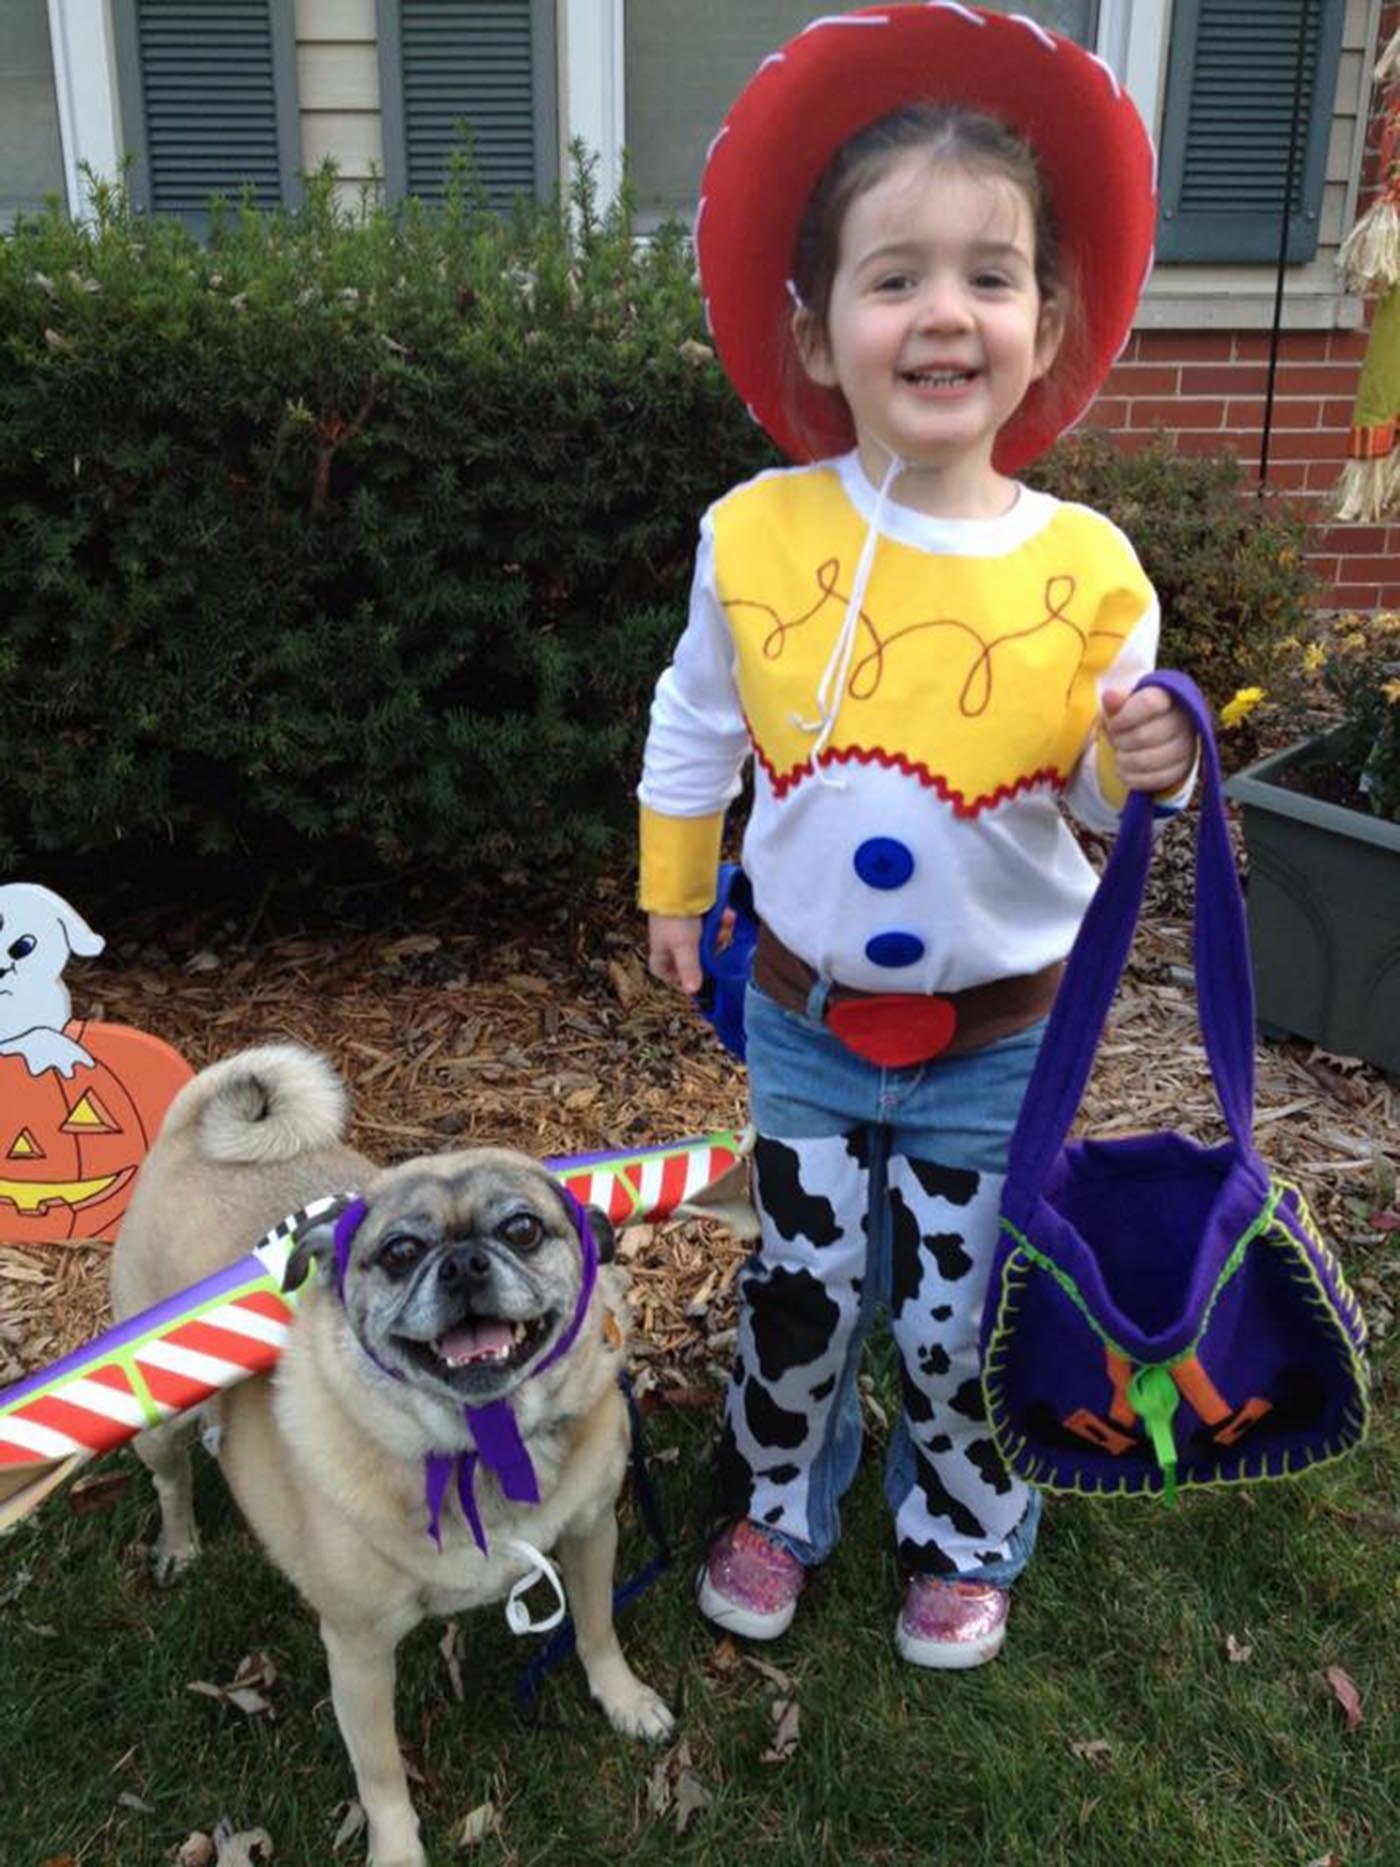 family costumes with baby and dog